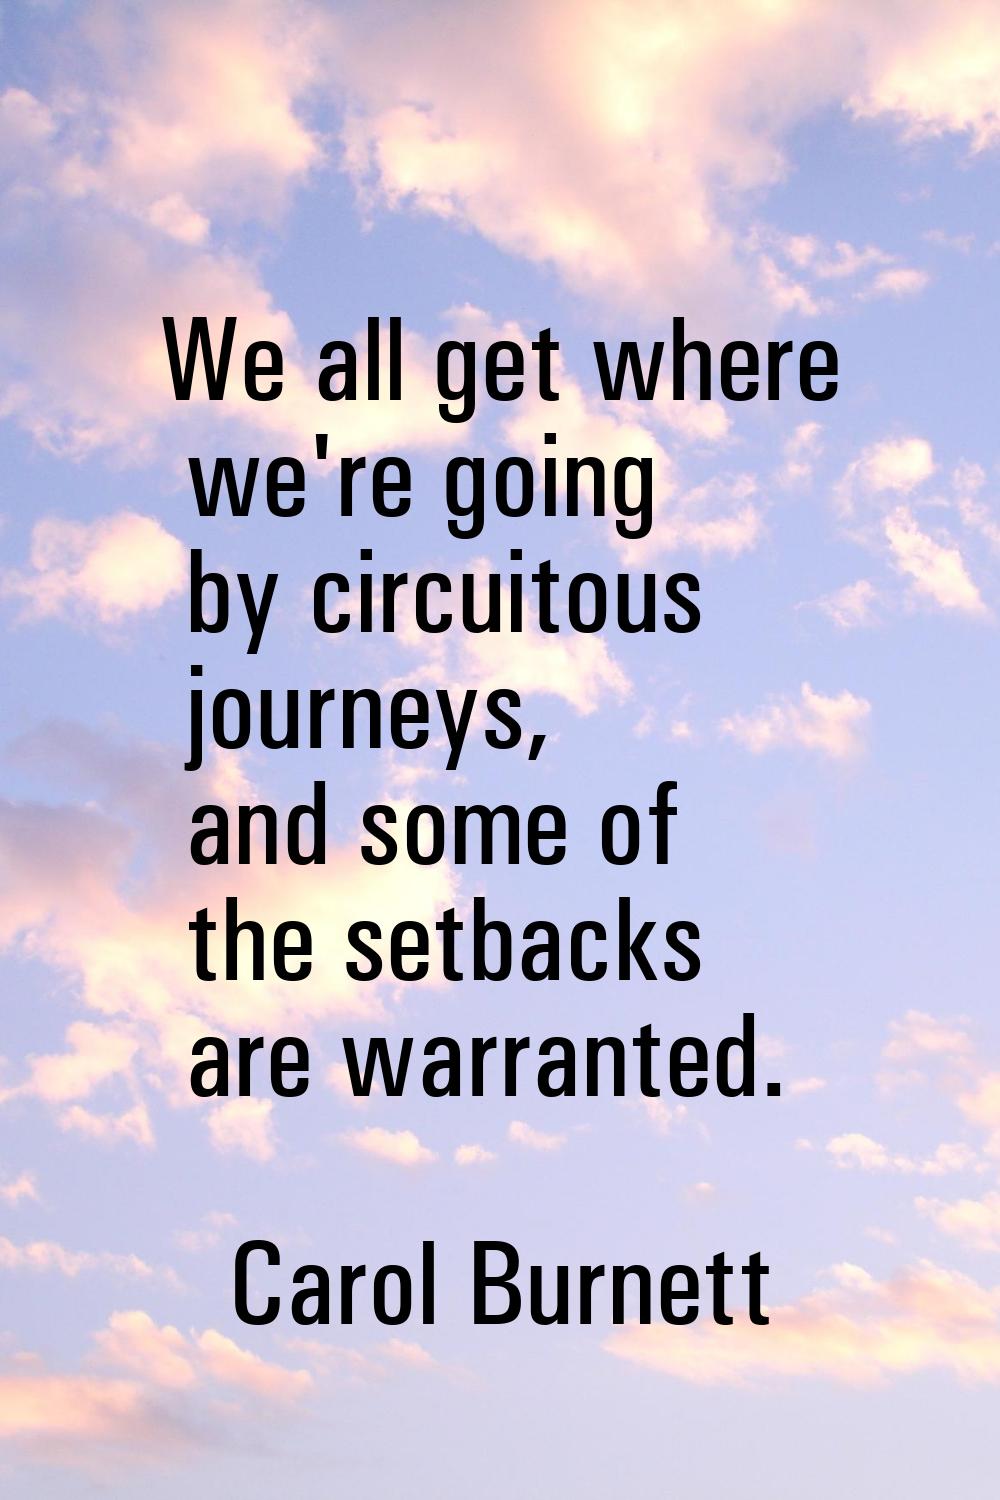 We all get where we're going by circuitous journeys, and some of the setbacks are warranted.